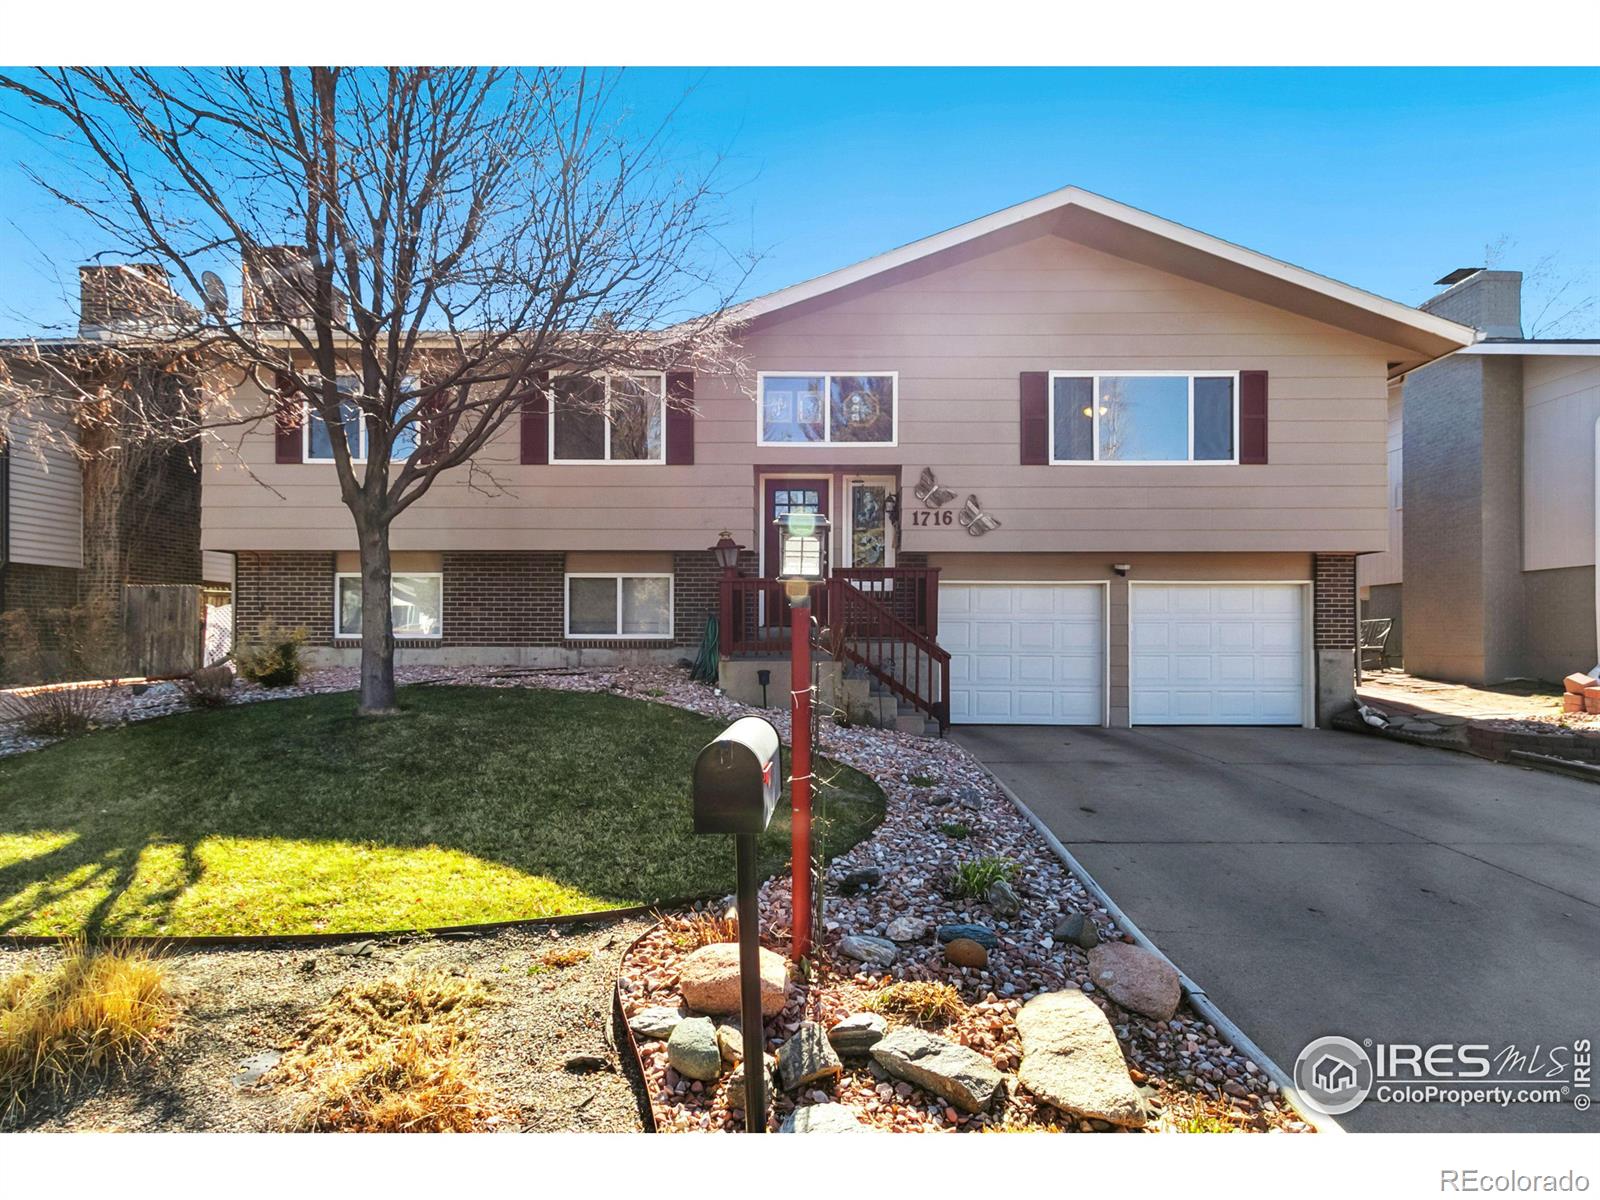 1716  26th Ave Ct, greeley MLS: 4567891005826 Beds: 4 Baths: 2 Price: $435,000